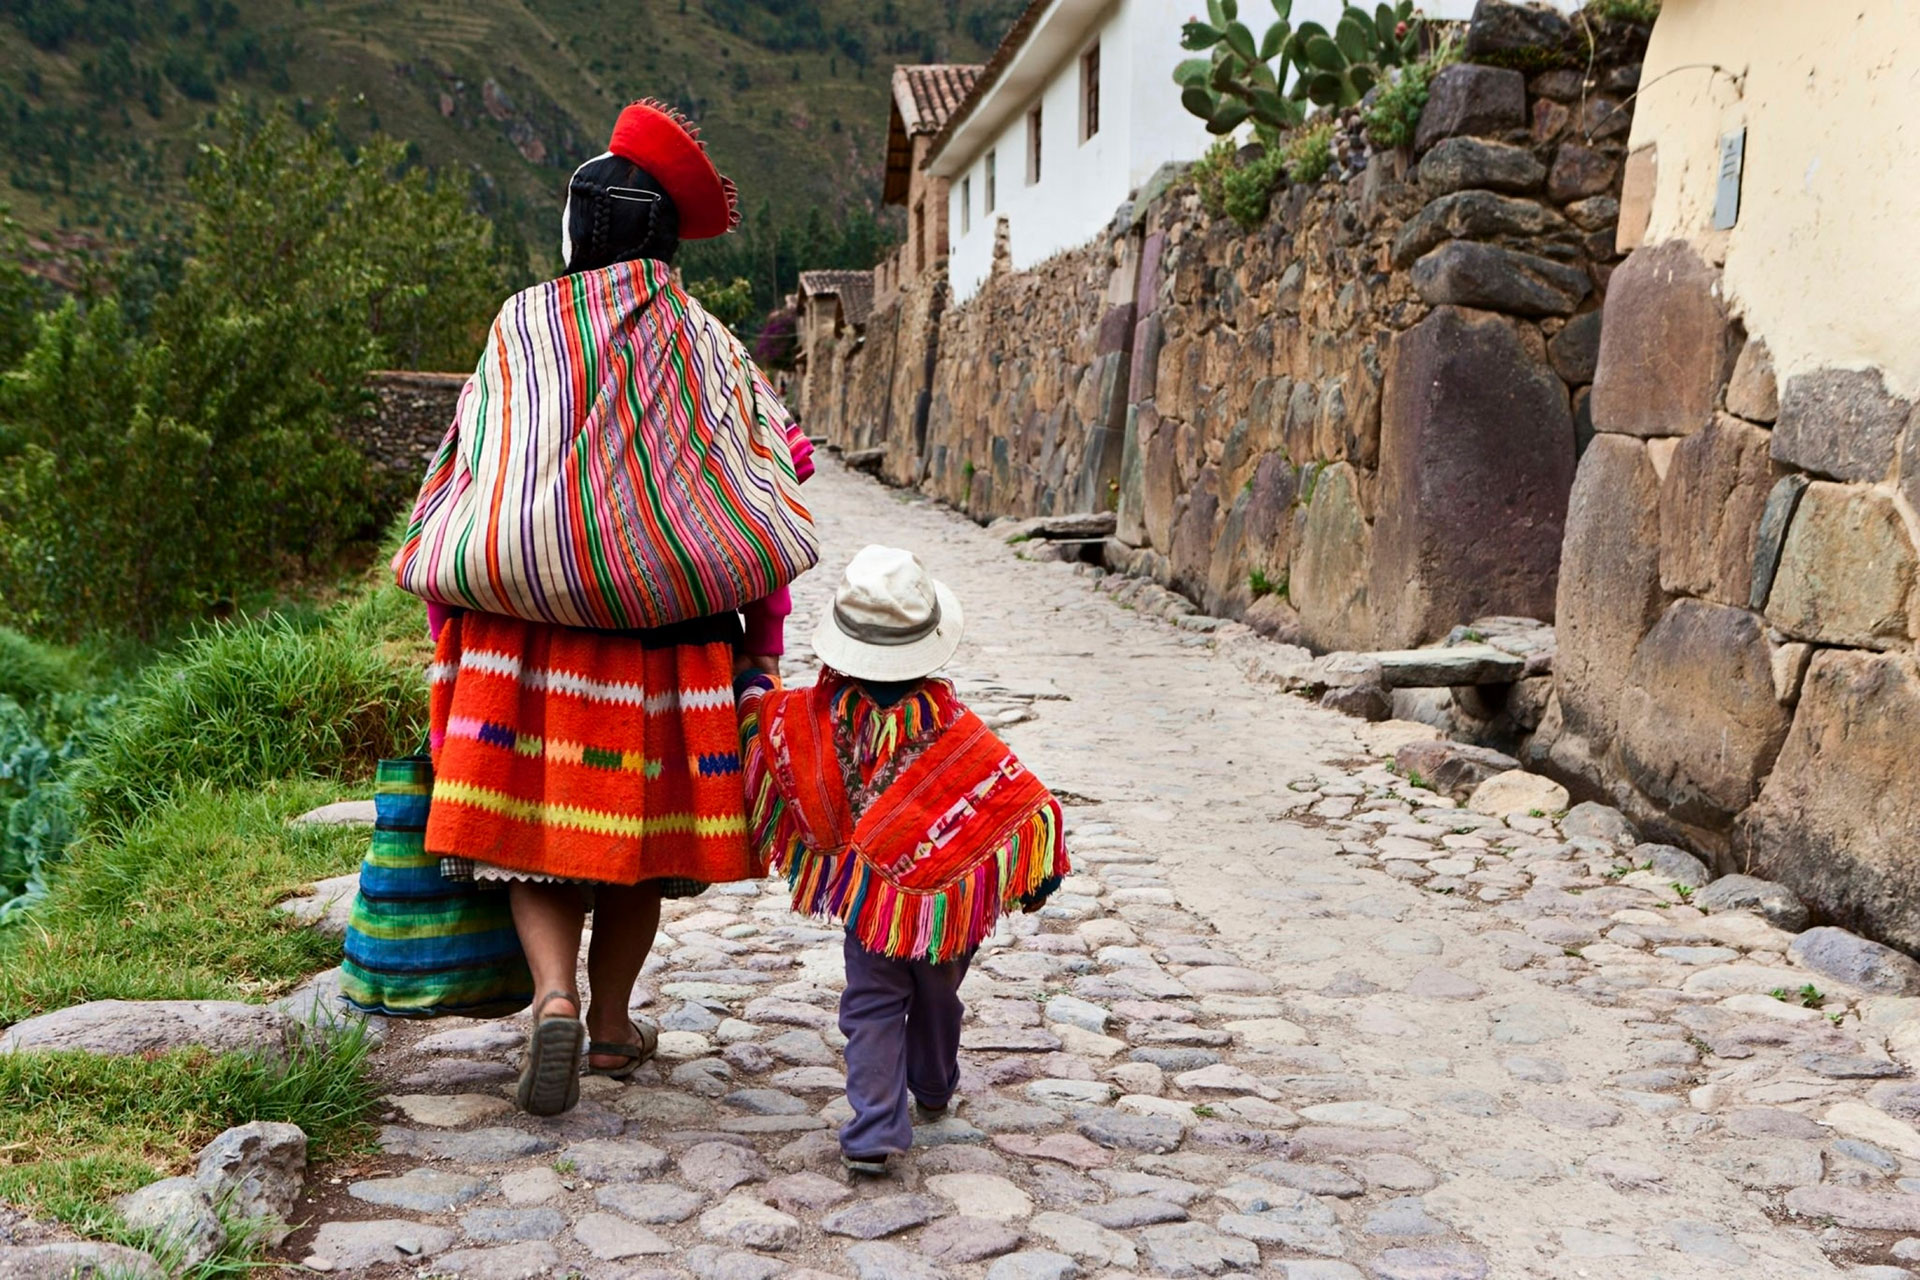 The Inca Trail and what you should know about Machu Picchu